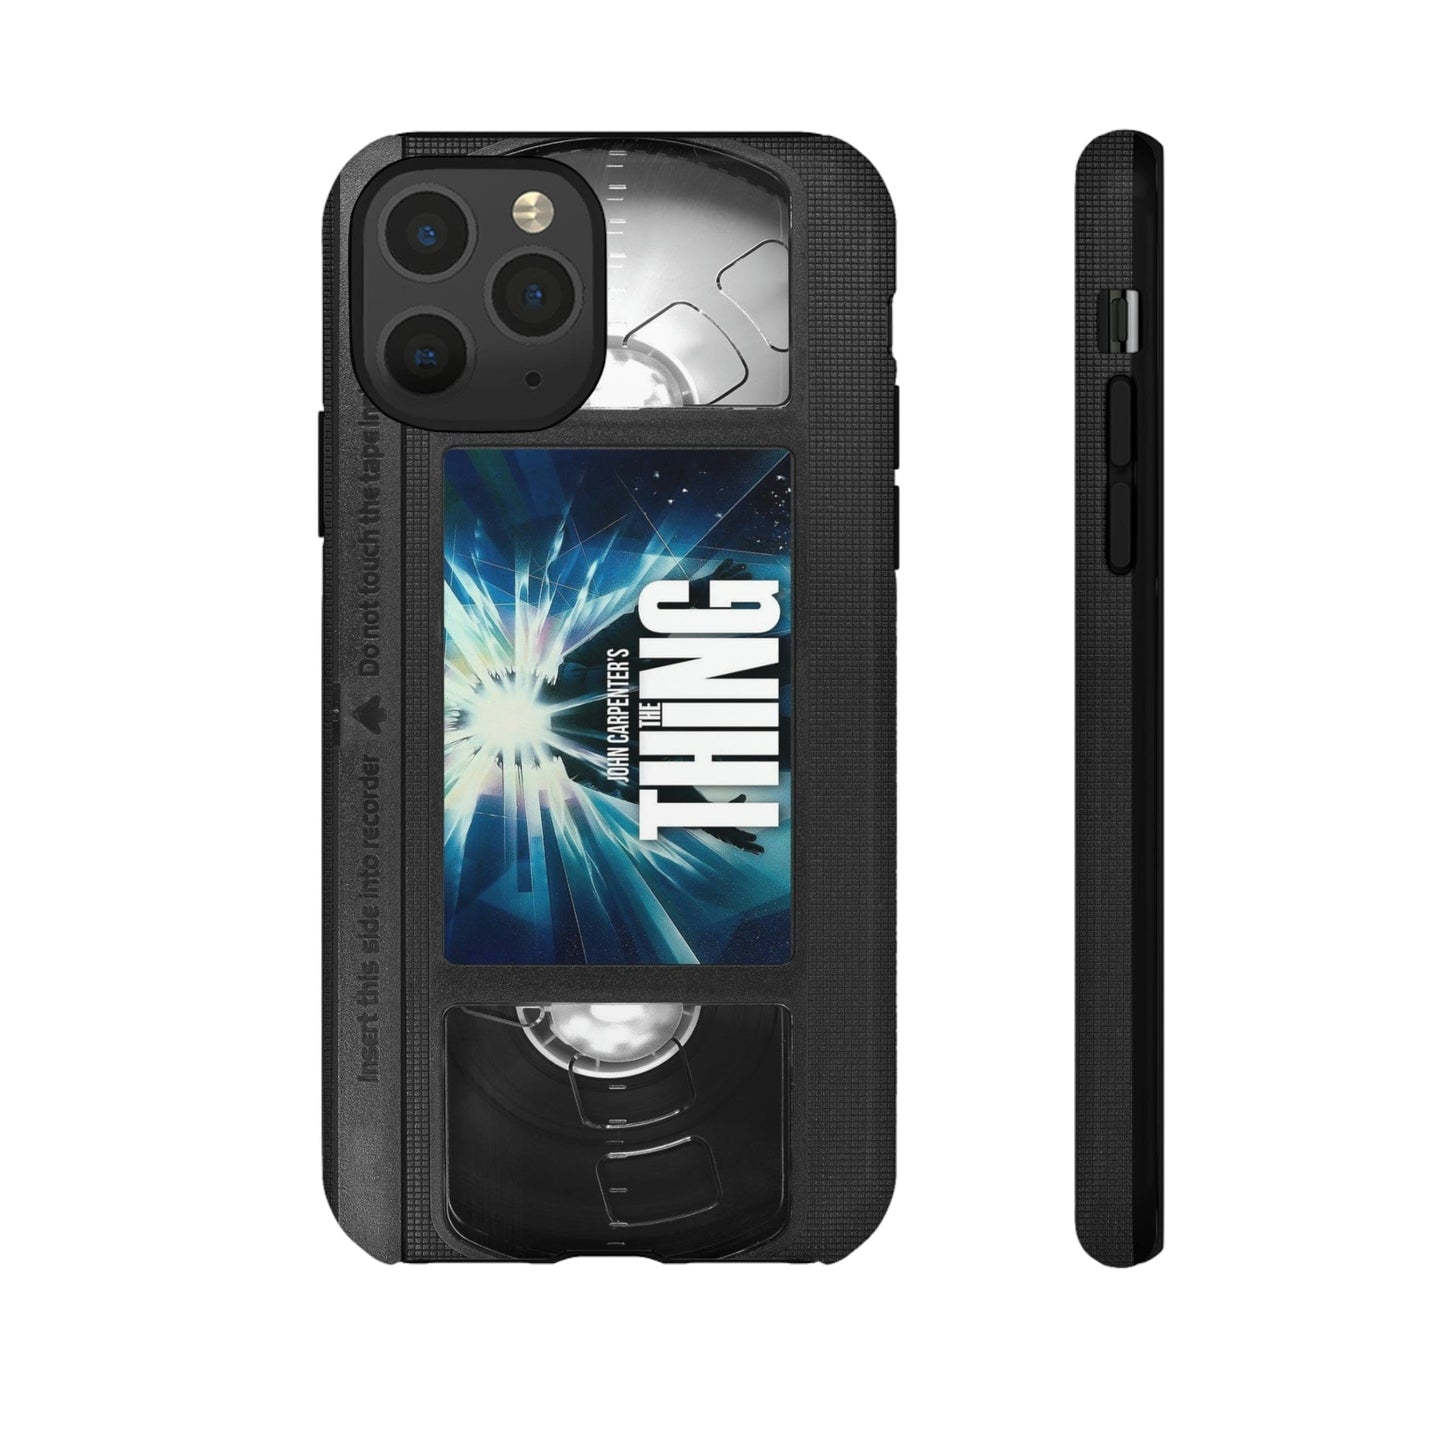 The Thing Impact Resistant Phone Case